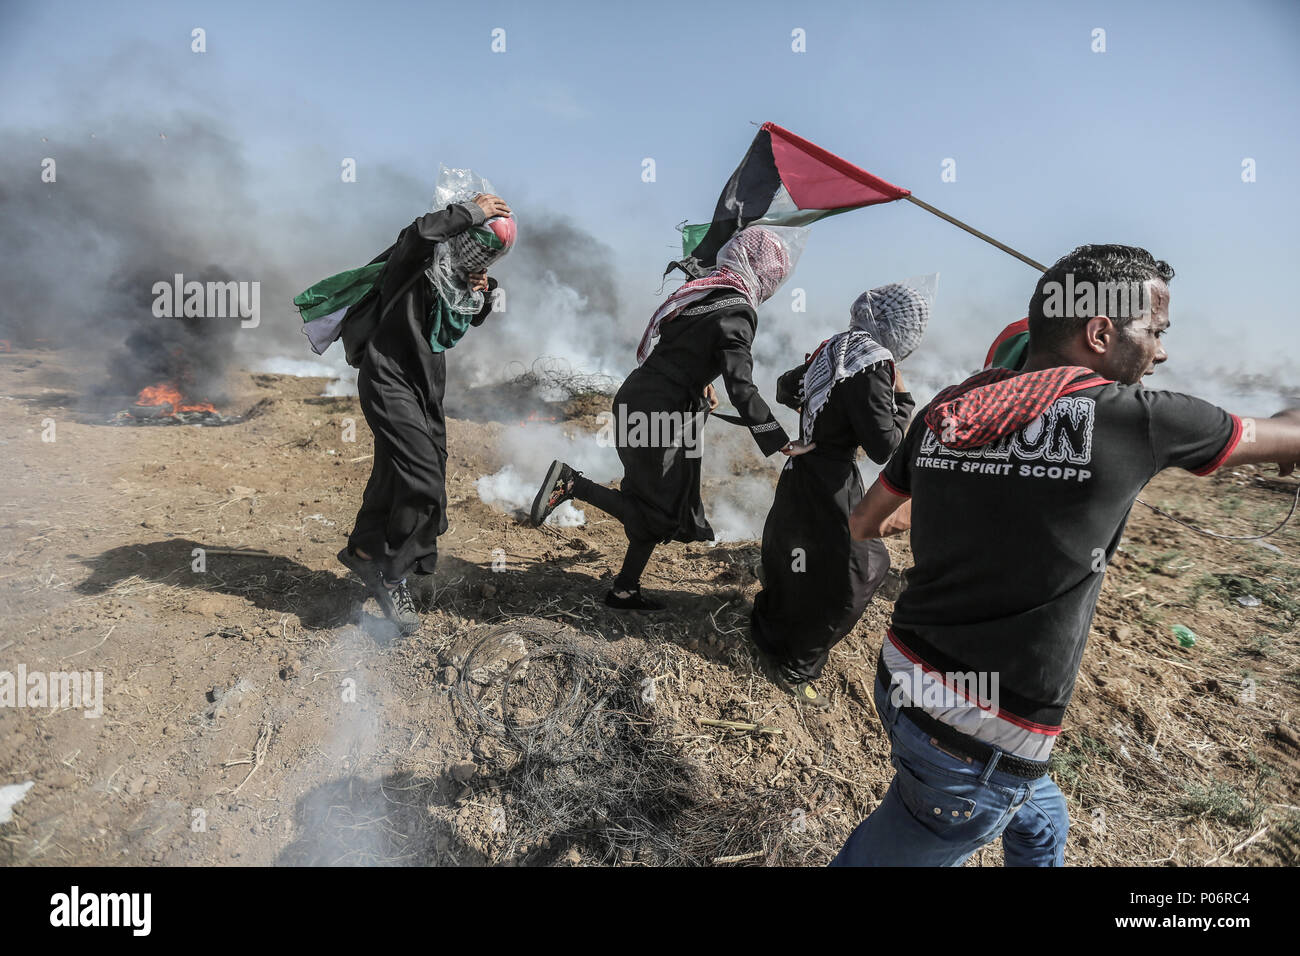 Female Palestinian protesters have plastic bags over their heads as protection from teargas fired by Israeli forces during clashes at a demonstration marking Jerusalem Day (Al Quds Day) at the Israli-Gaza border east of Gaza City, Gaza Strip, 08 June 2018. Photo: Wissam Nassar/dpa Stock Photo